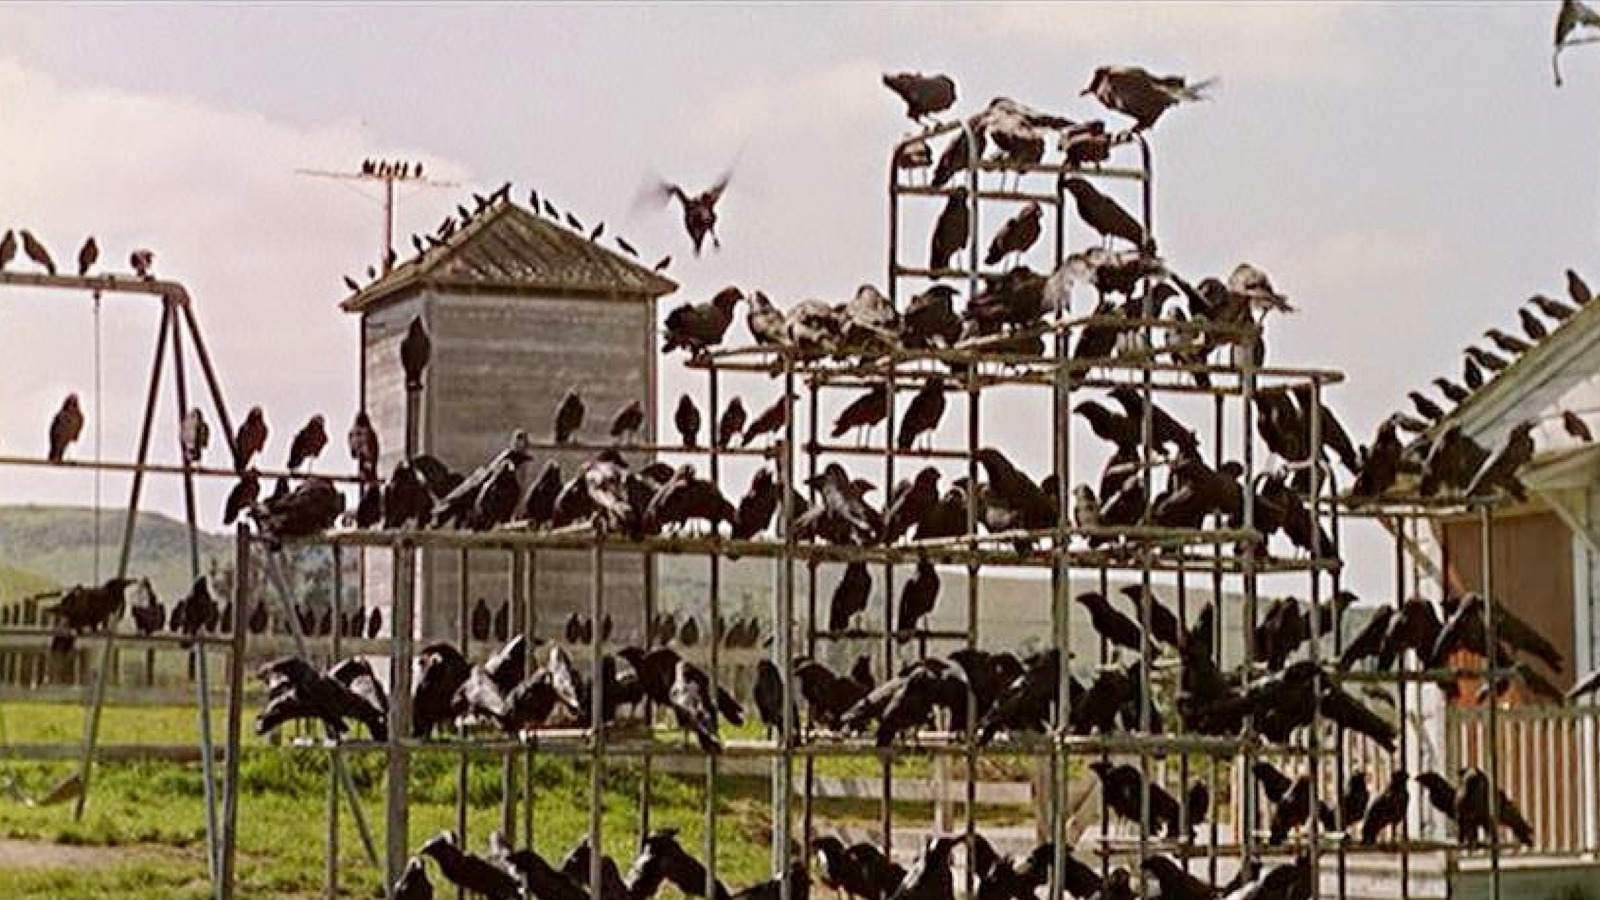 How Hitchcock Brought The Birds’ Terrors To Life